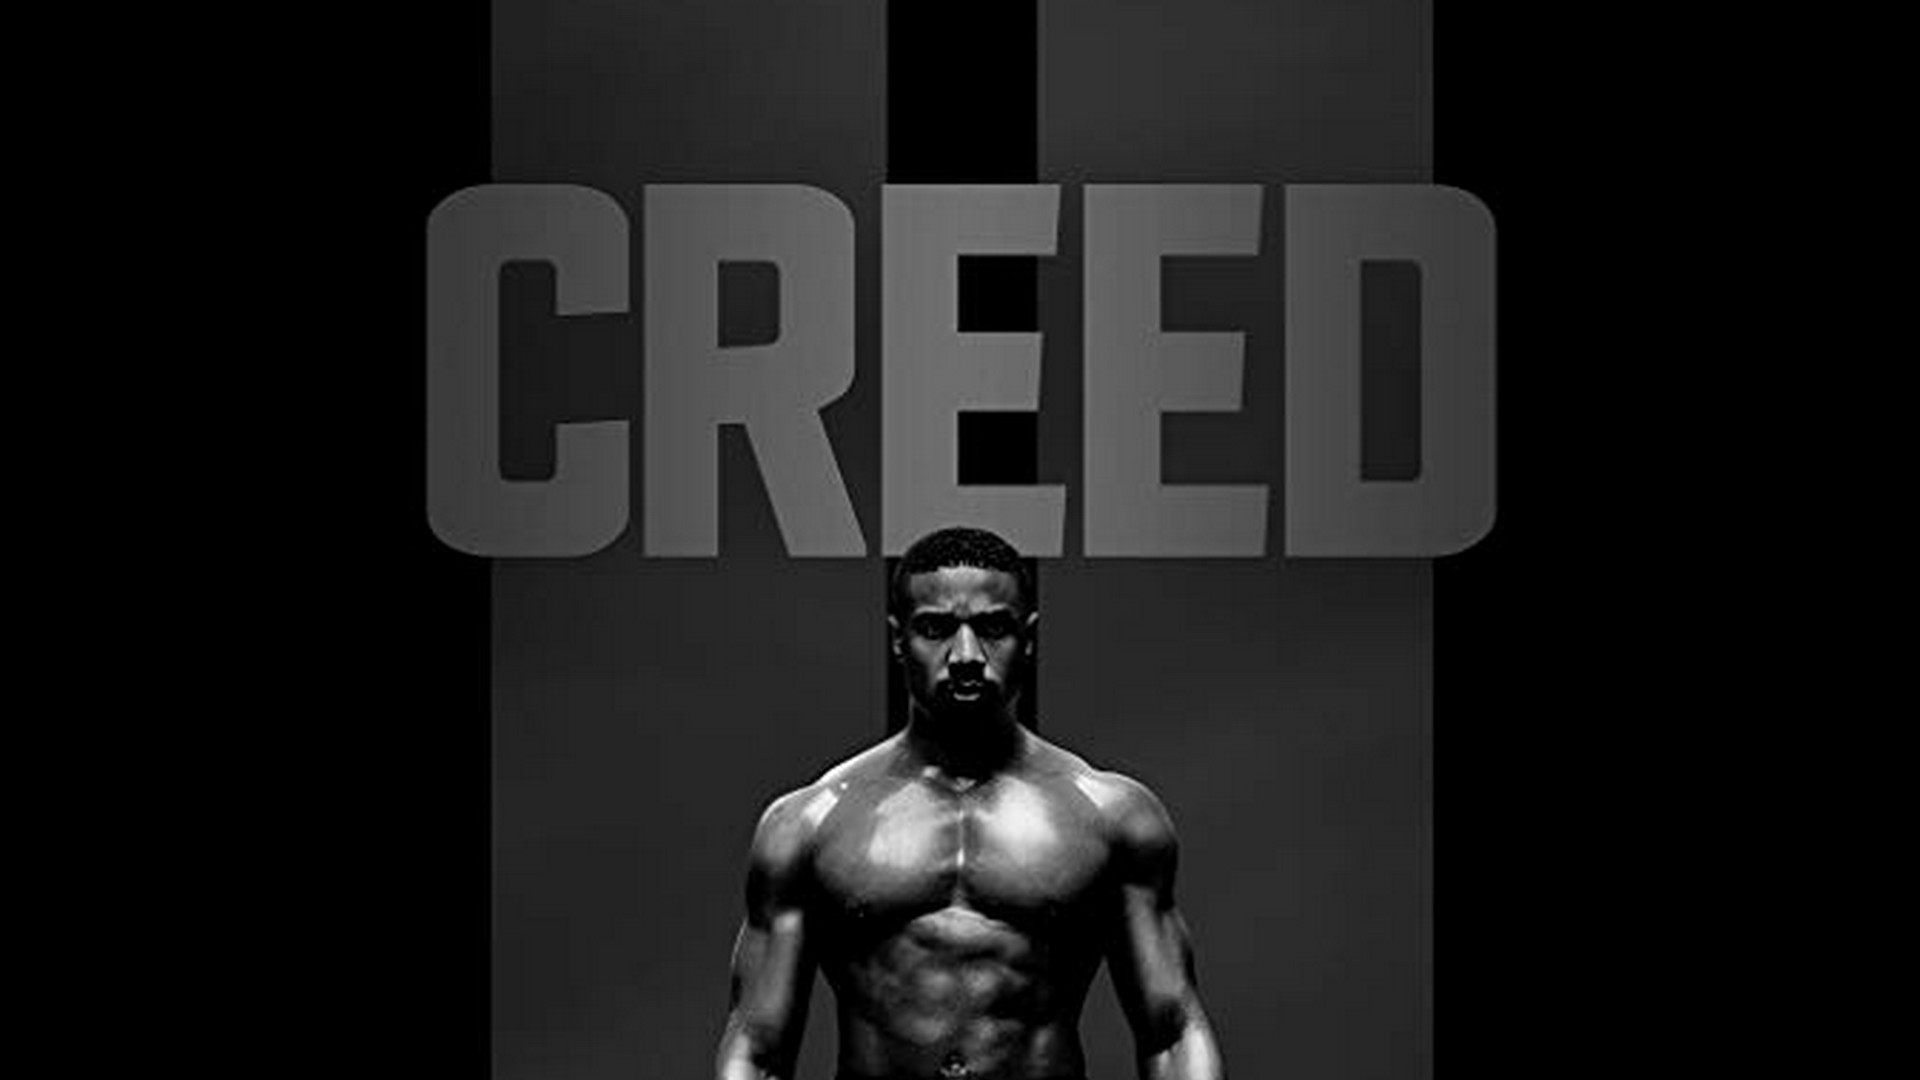 Creed 2 2018 Wallpaper HD With Resolution 1920X1080 pixel. You can make this wallpaper for your Mac or Windows Desktop Background, iPhone, Android or Tablet and another Smartphone device for free